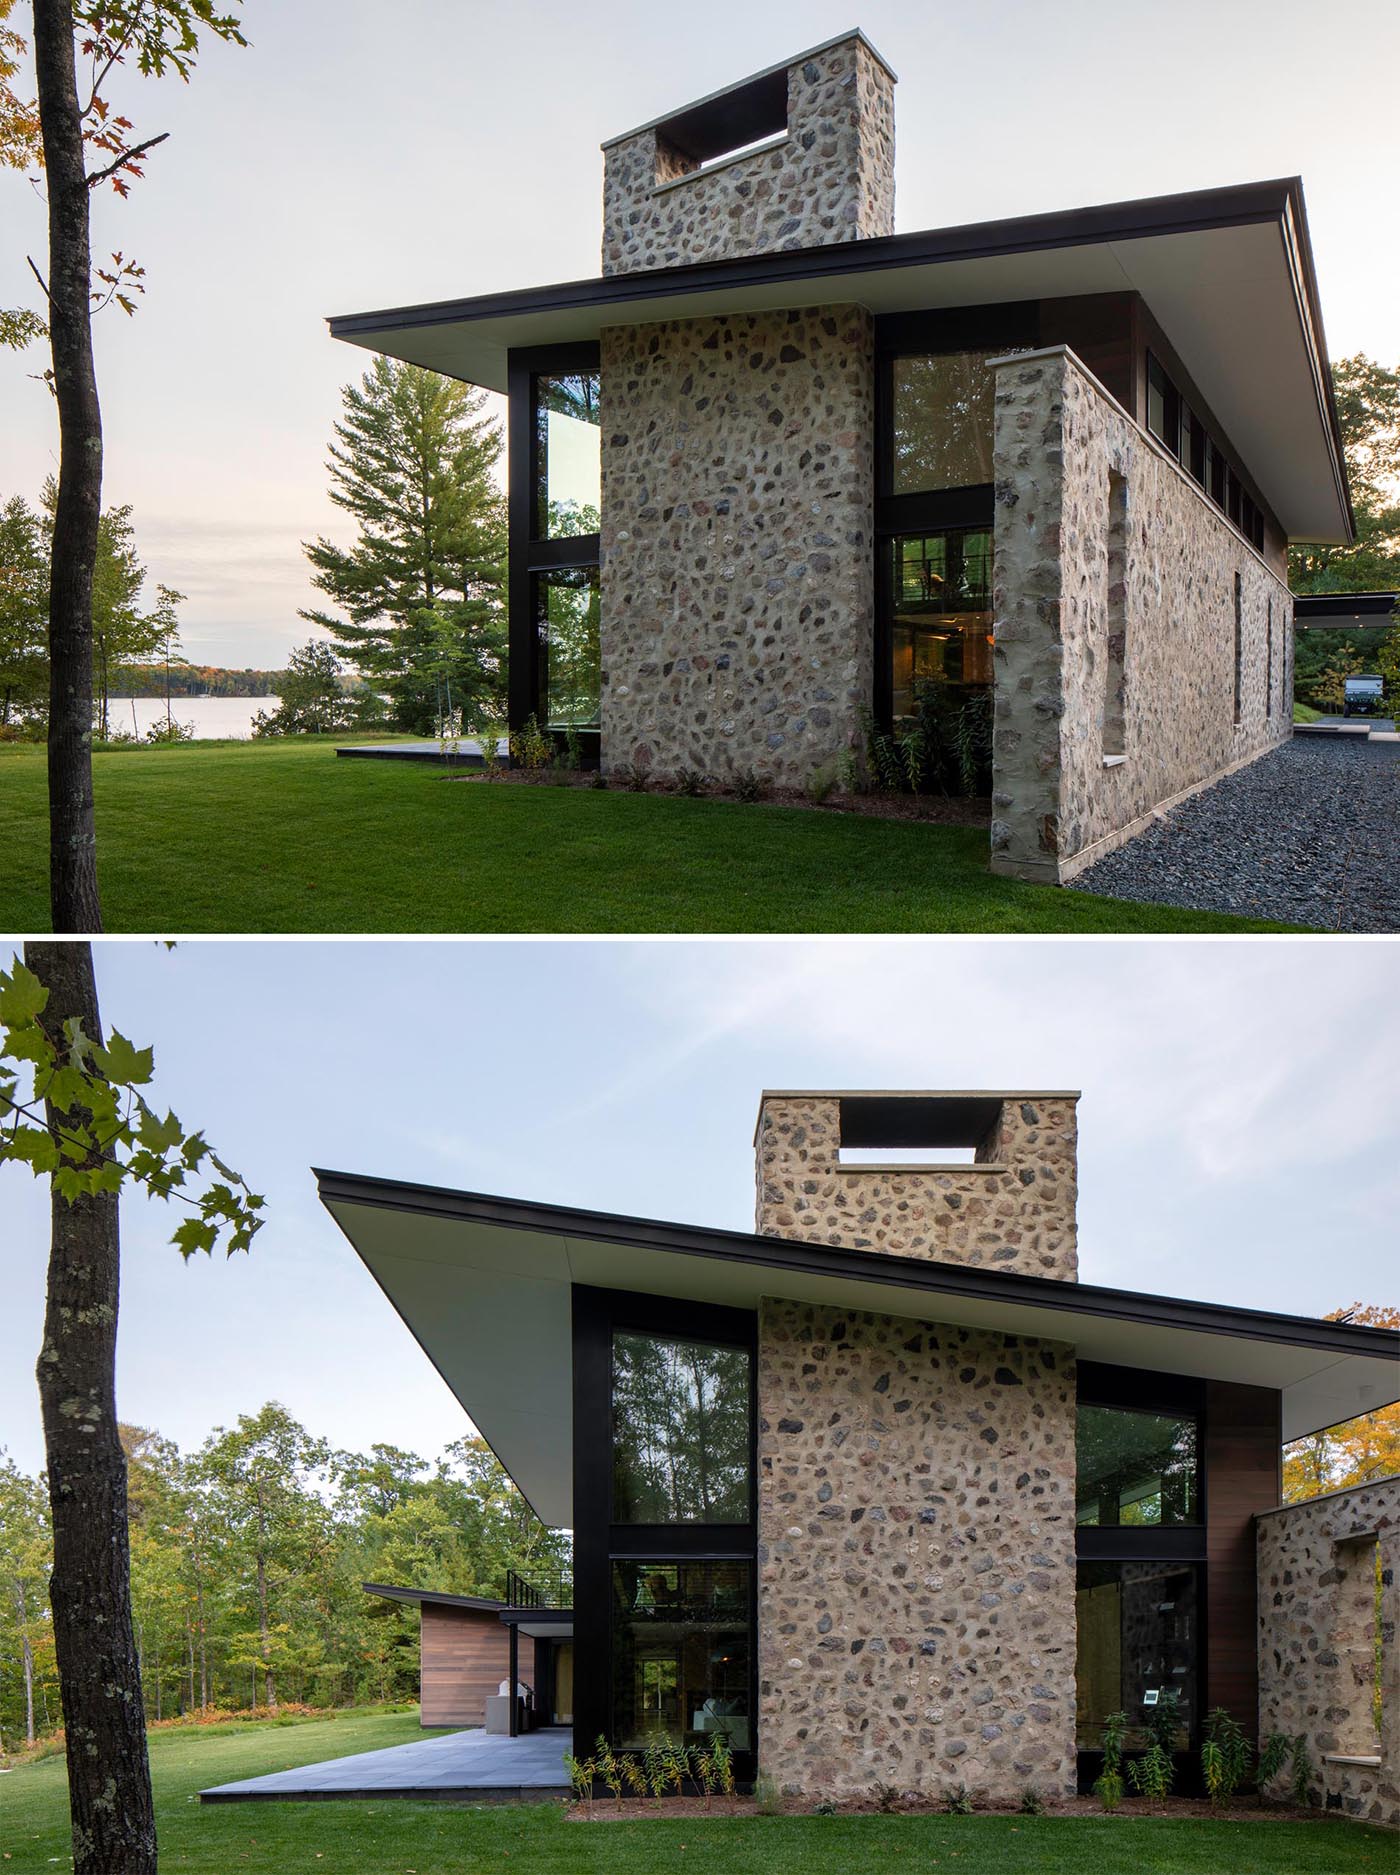 Rough-cut fieldstone set in thick, hand-troweled mortar stretches across this modern homes exterior’s south facade and connects with the interior two-story central fireplace.